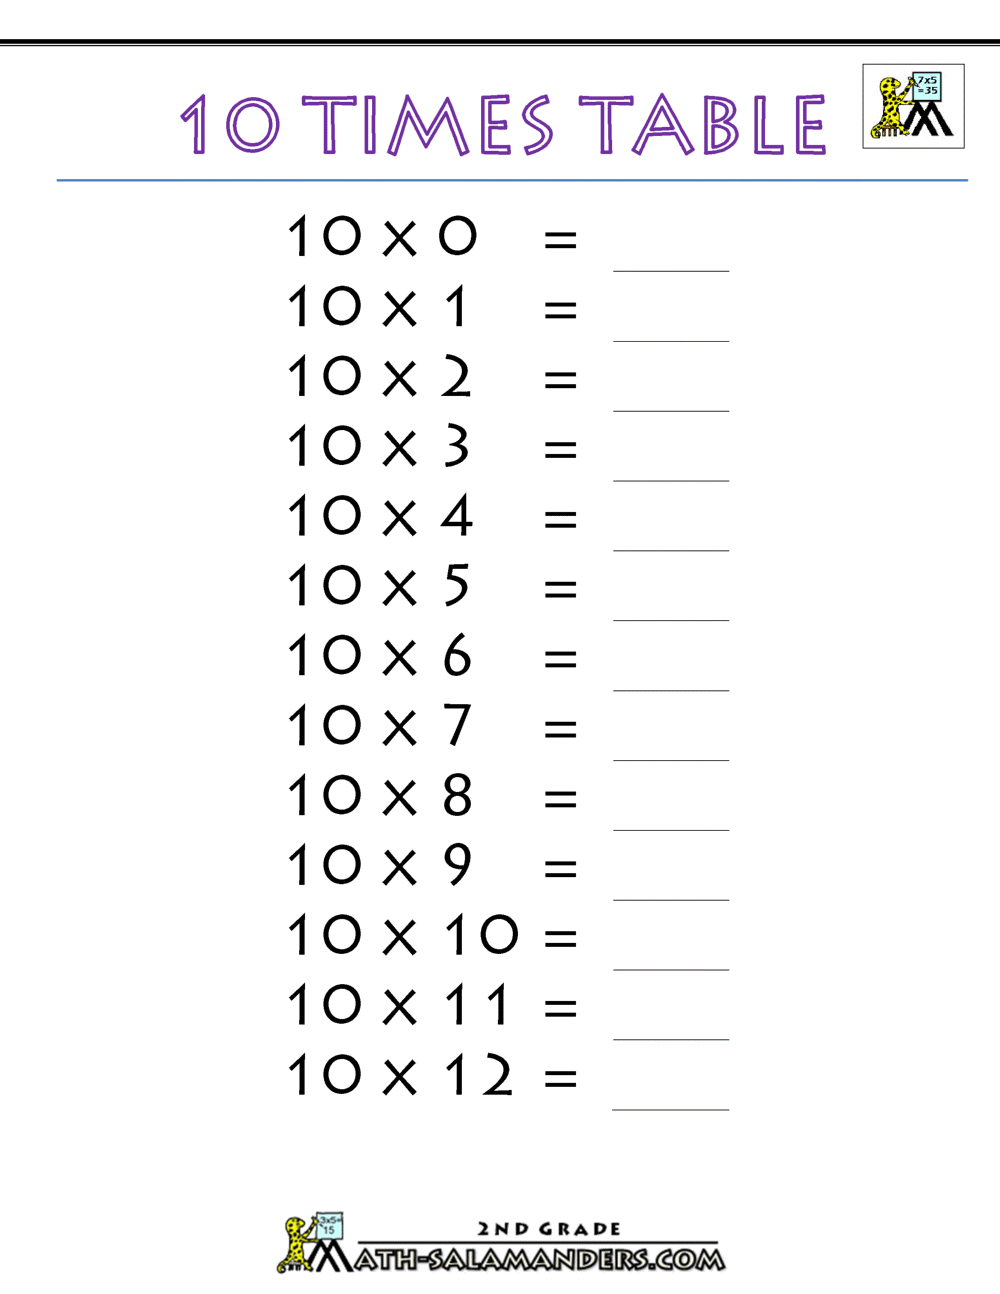 Blank Multiplication Chart Up To 12